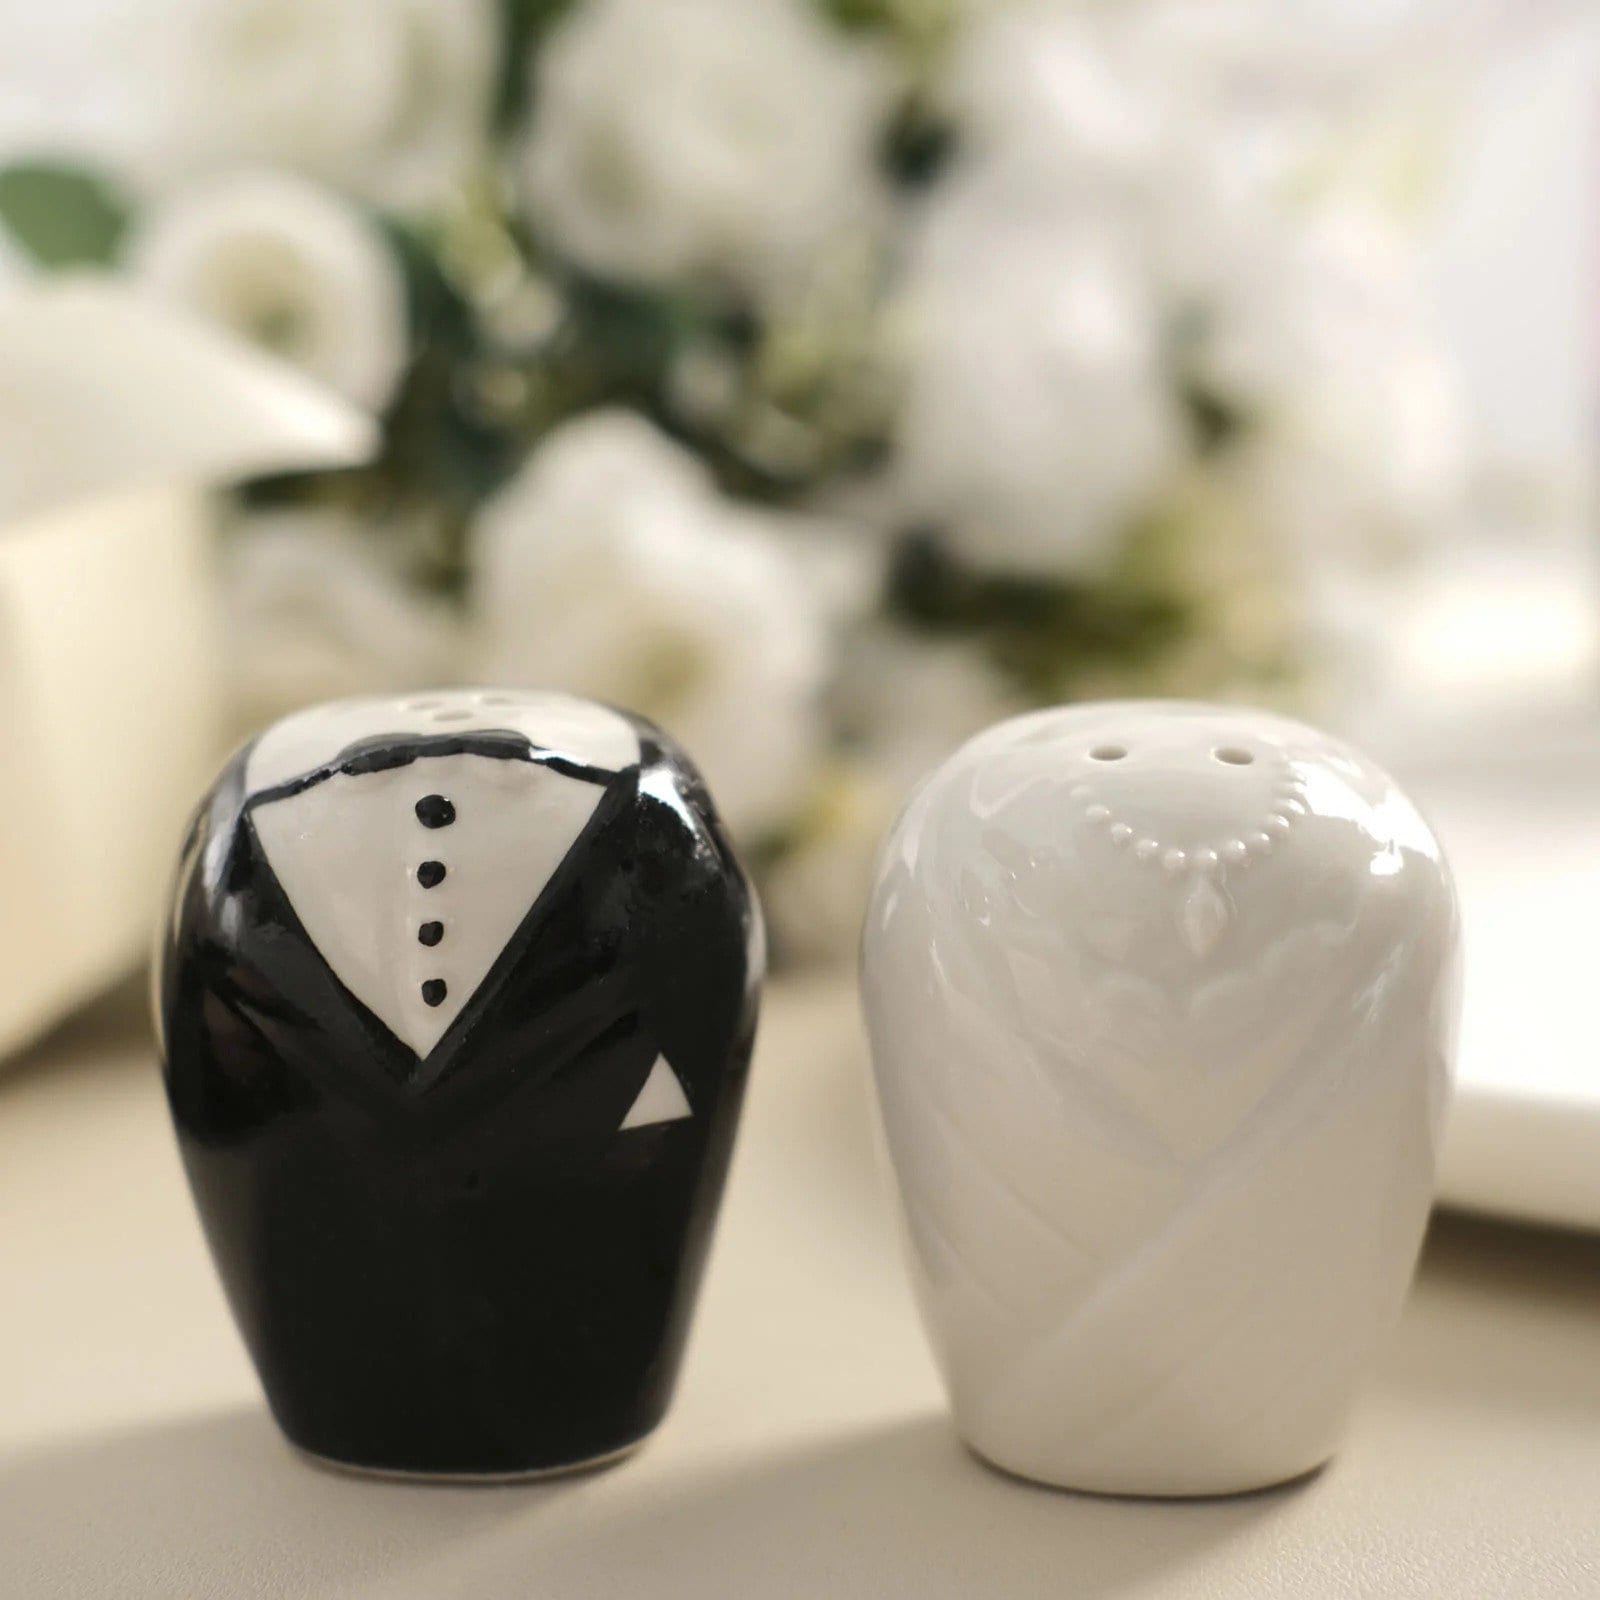 Newlydeads Bride and Groom Ceramic Salt and Pepper Shakers 